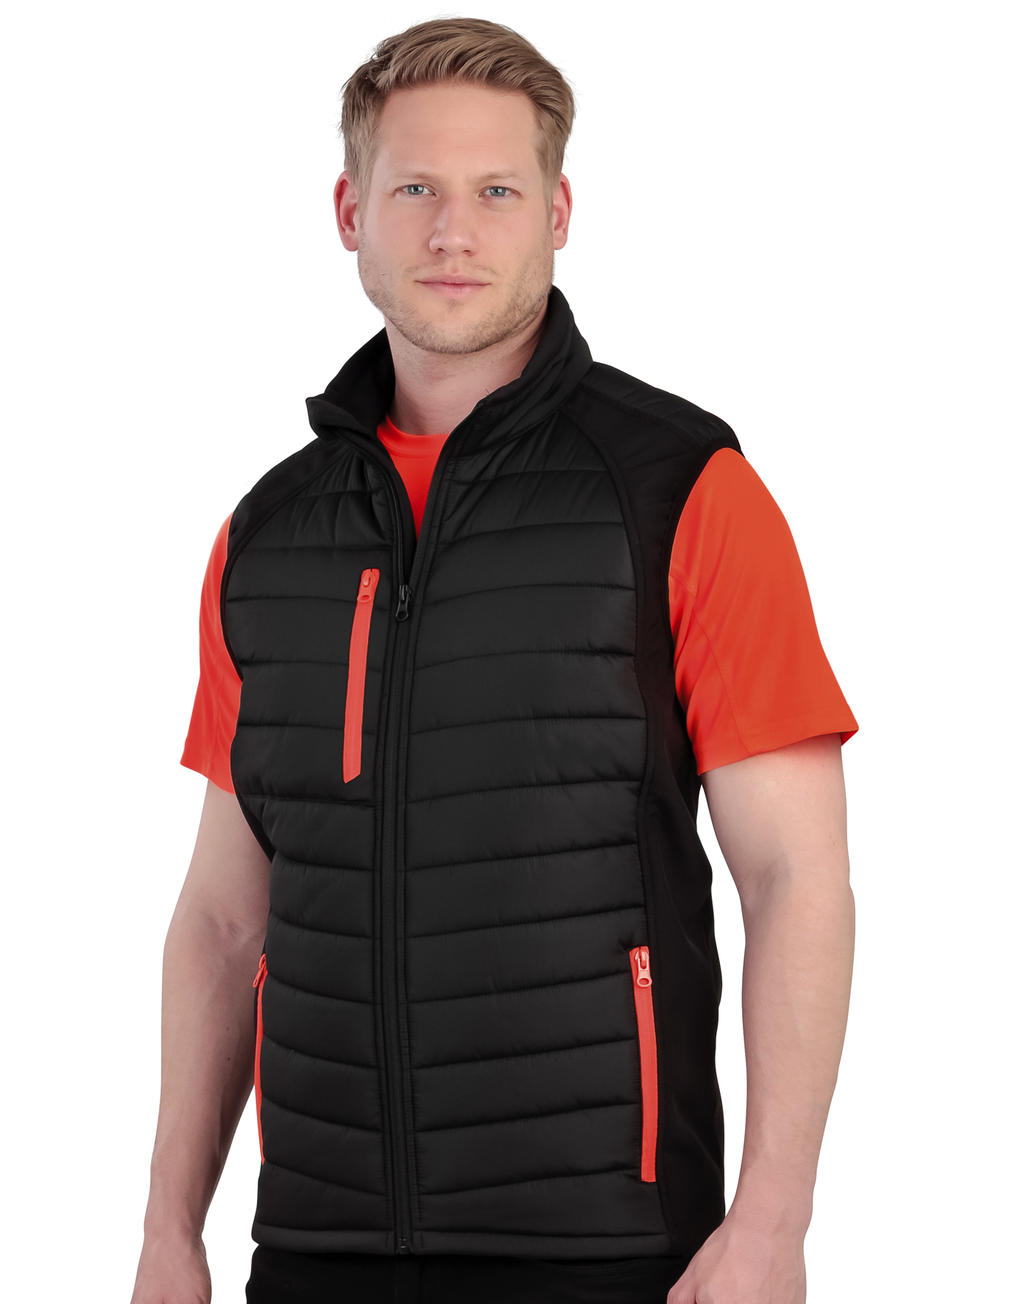  Black Compass Padded Softshell Gilet in Farbe Black/Yellow